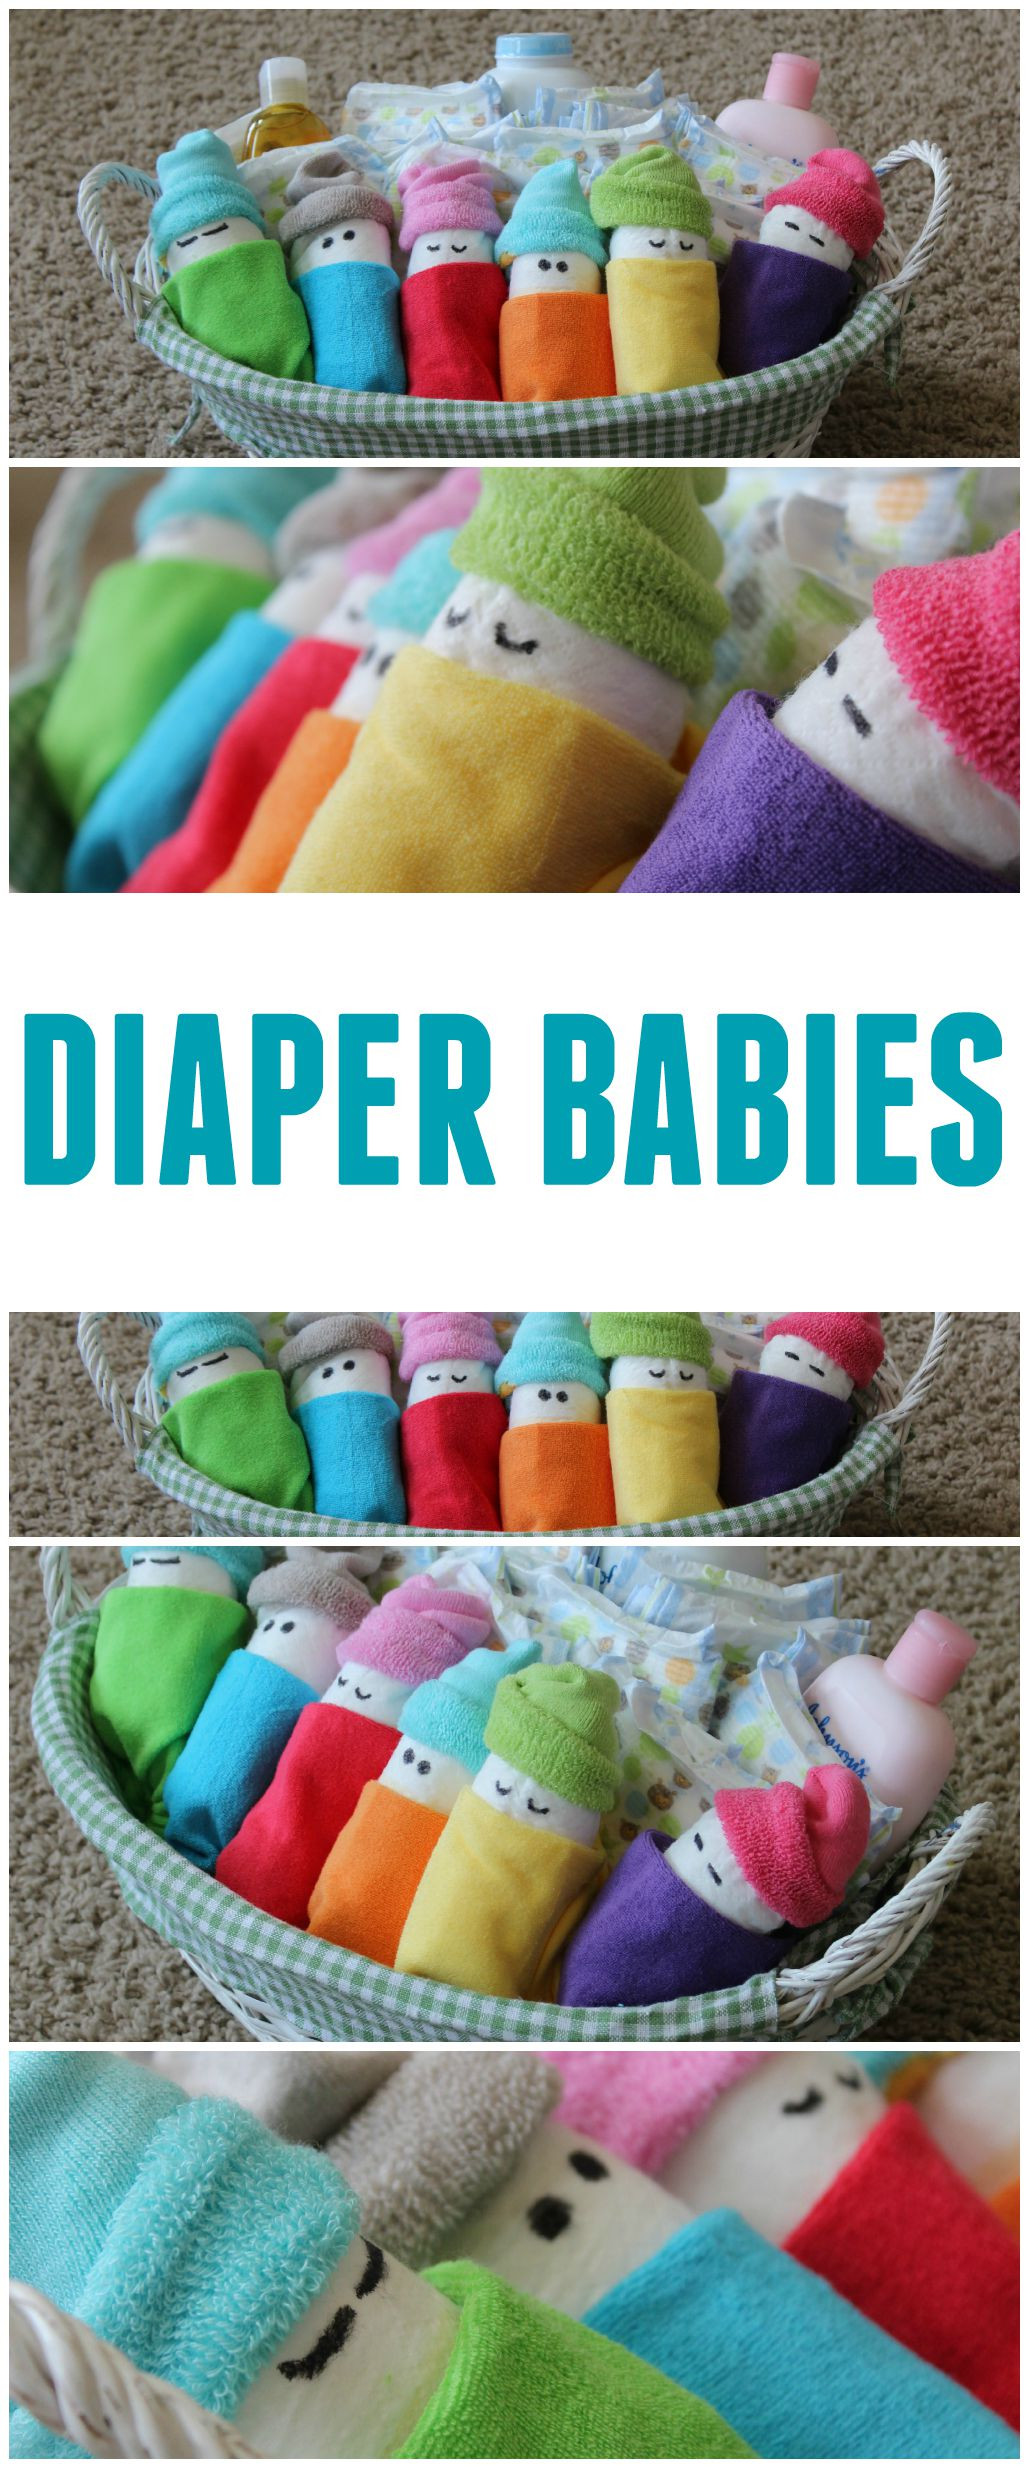 Baby Shower Ideas Gift
 How To Make Diaper Babies Easy Baby Shower Gift Idea